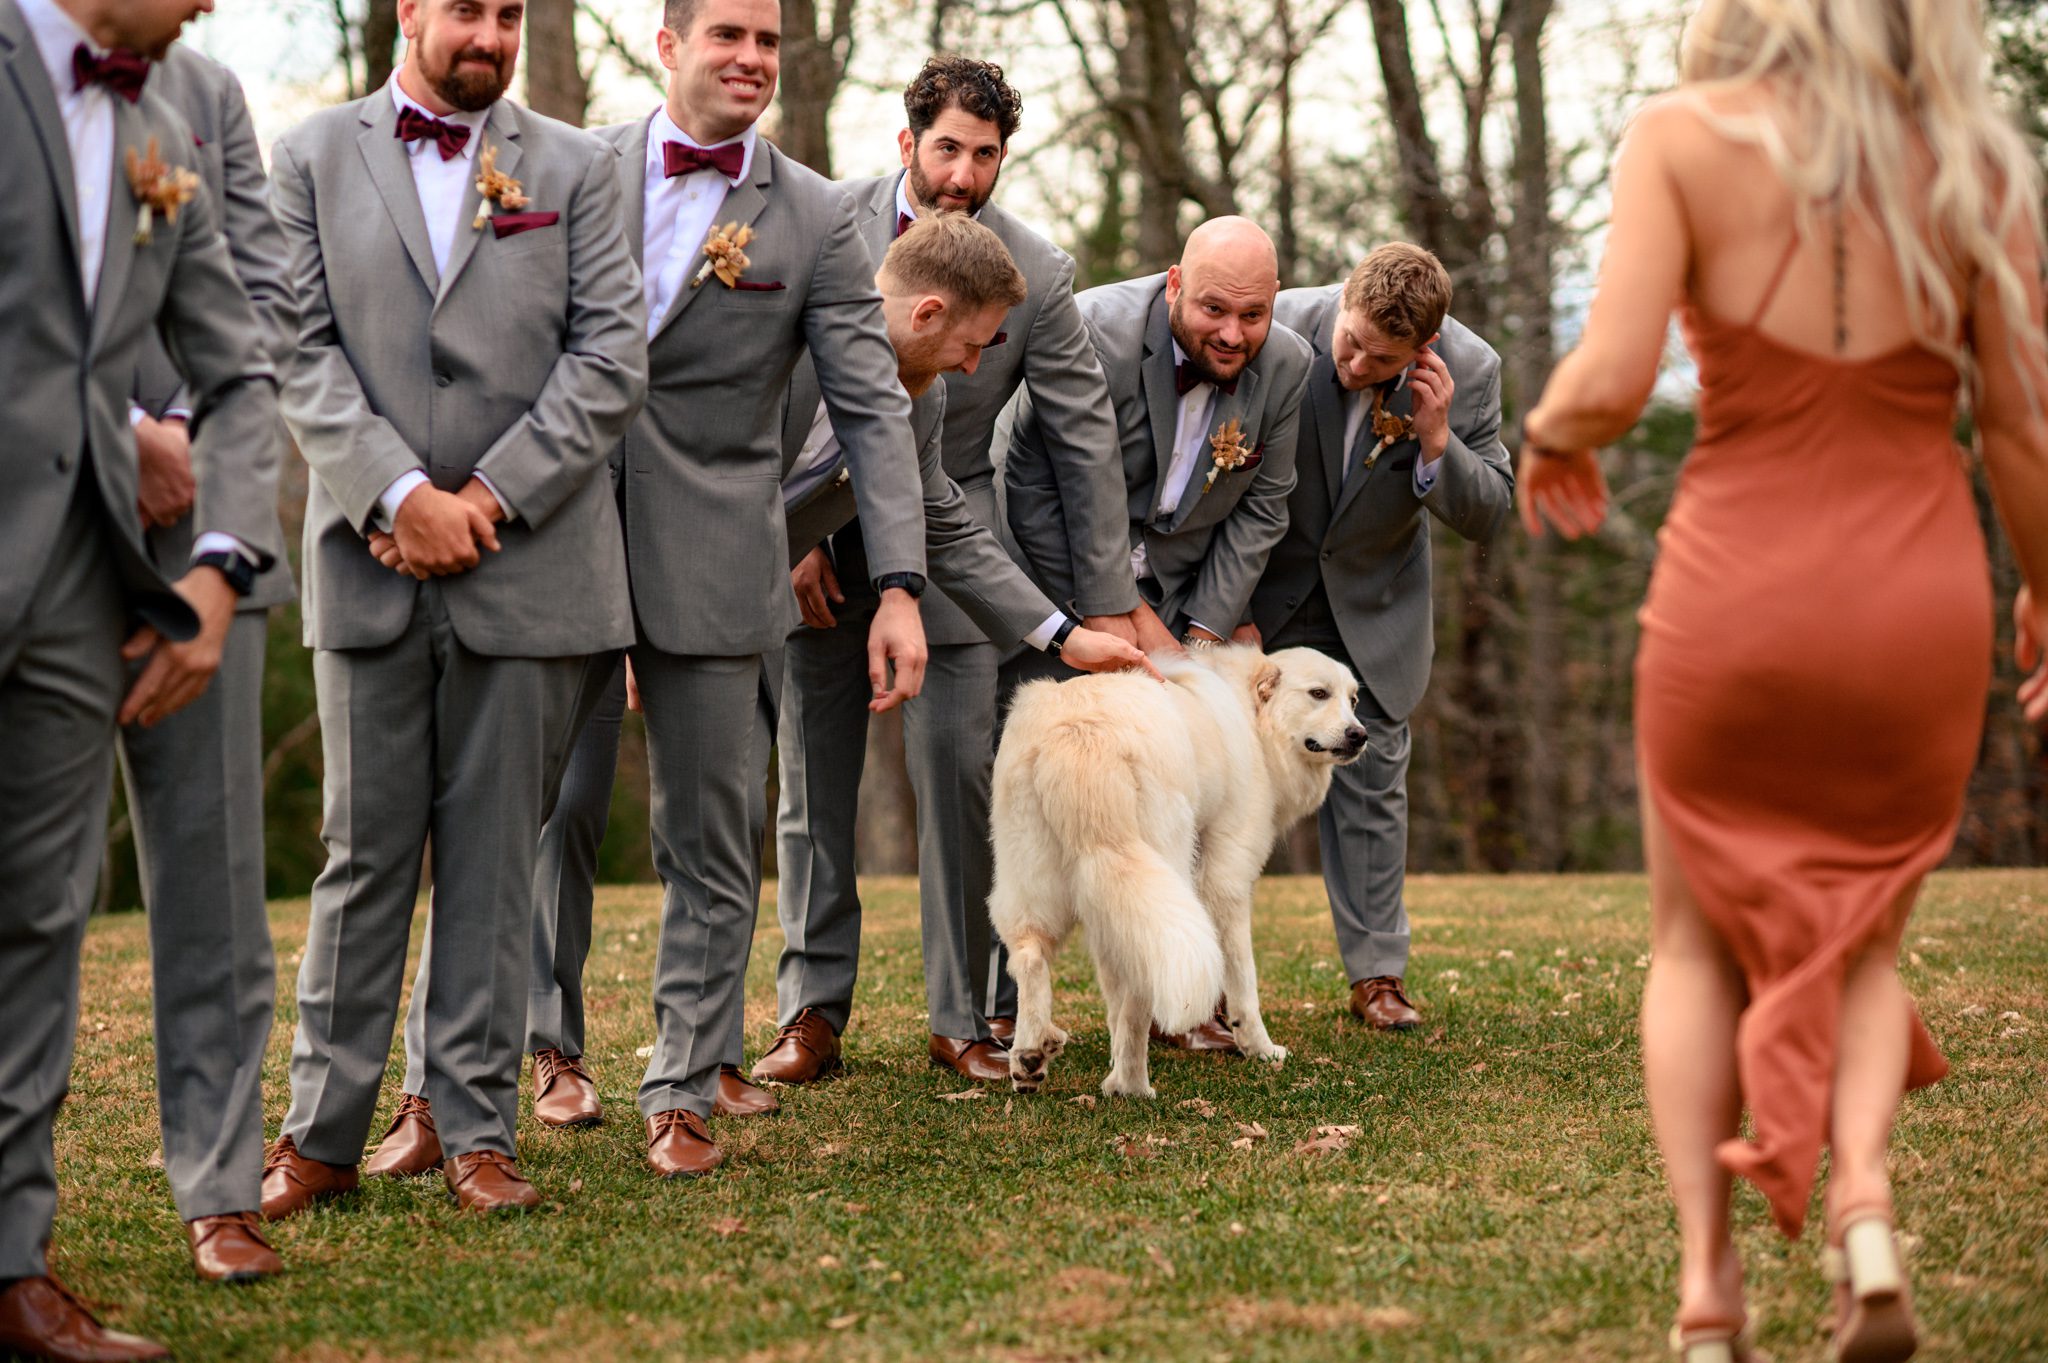 The brides dog gets loose during wedding ceremony and is stopped by the groomsmen